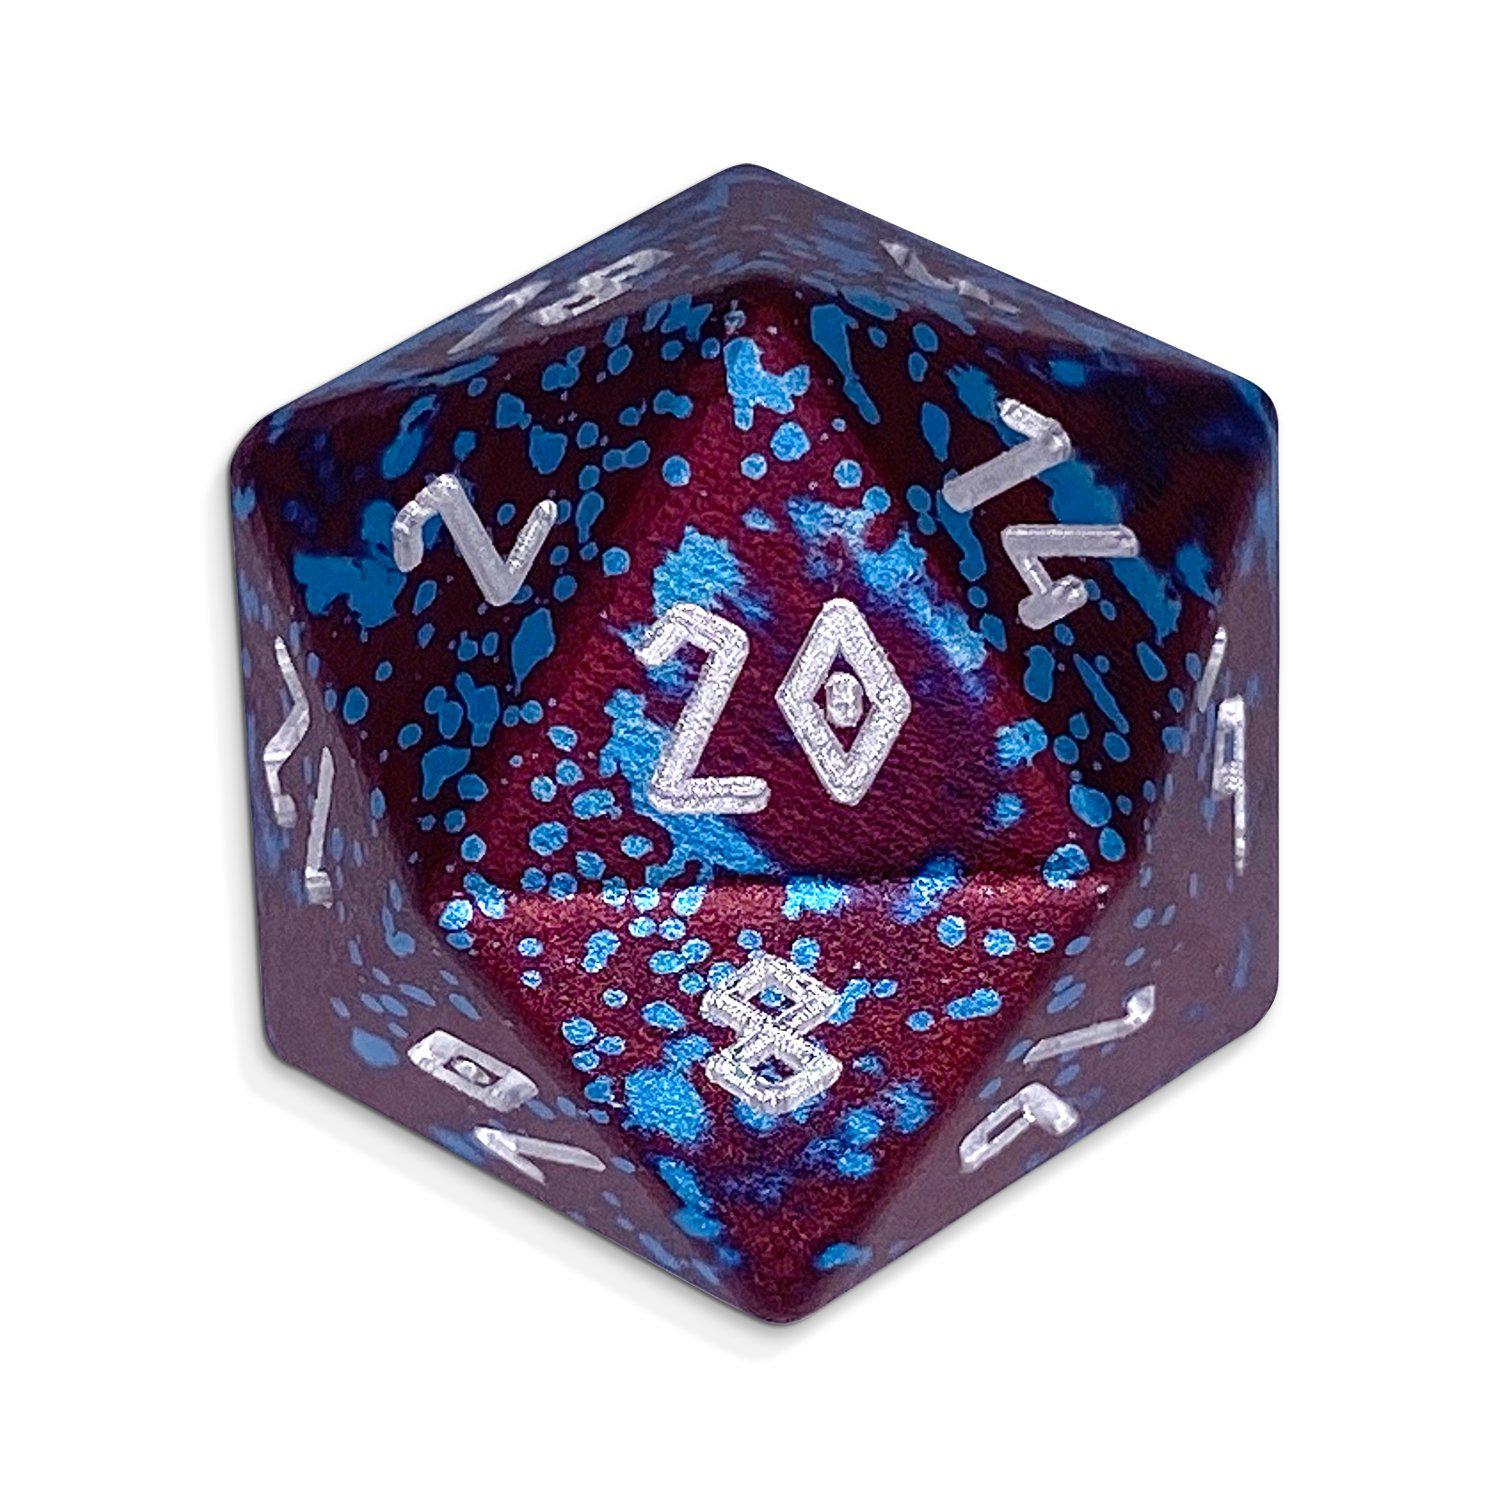 Single Wondrous Dice® D20 in Faerie Dragon by Norse Foundry 6063 Aircraft Grade Aluminum